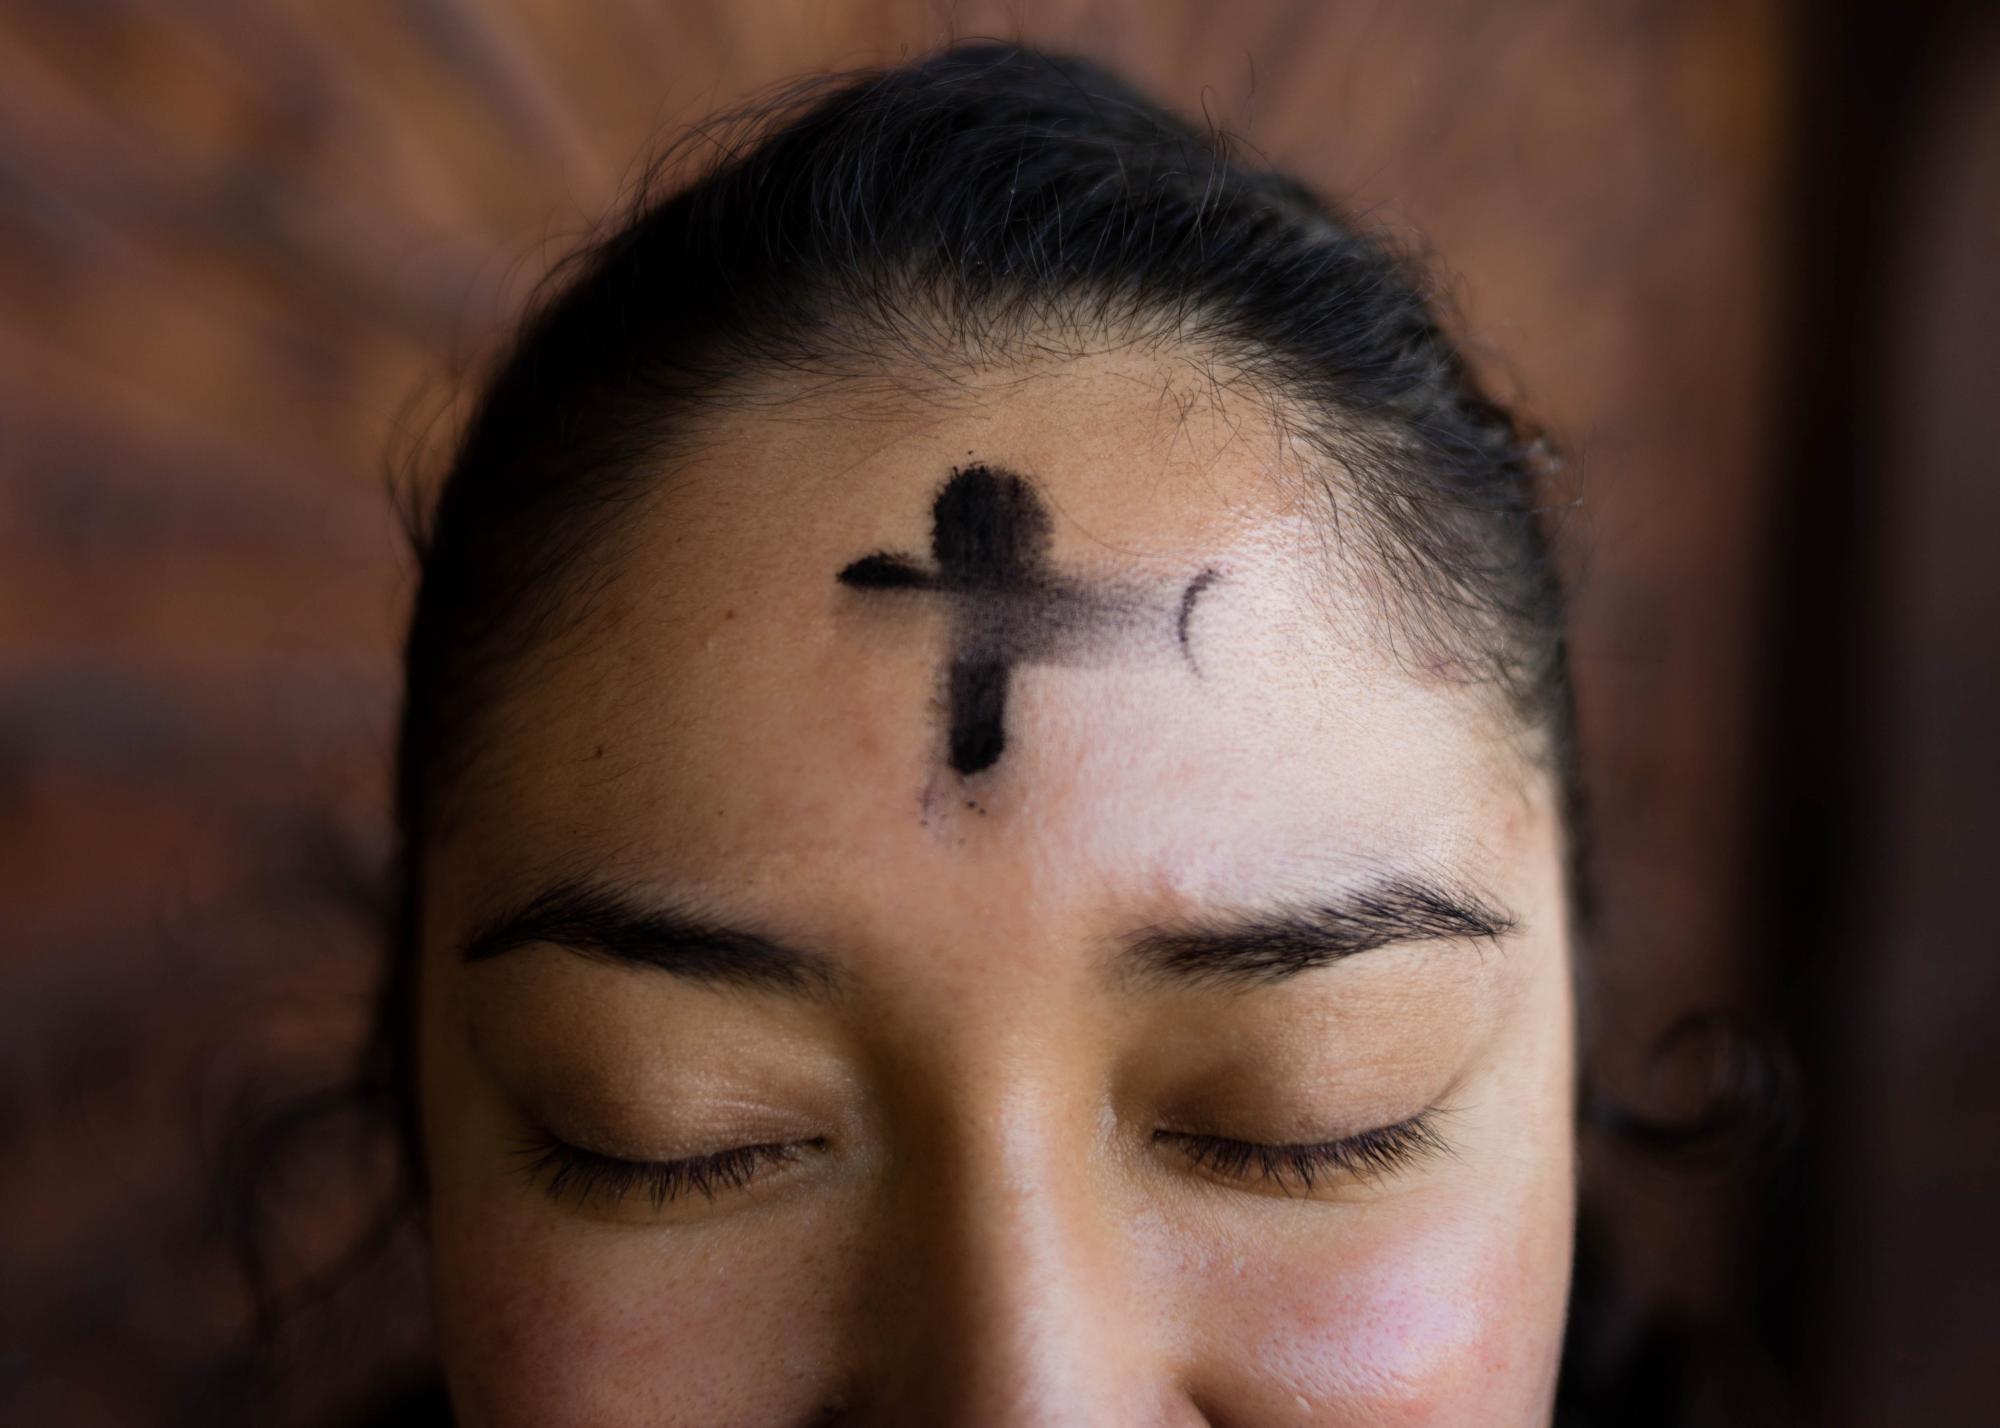 Woman with ash cross on forehead